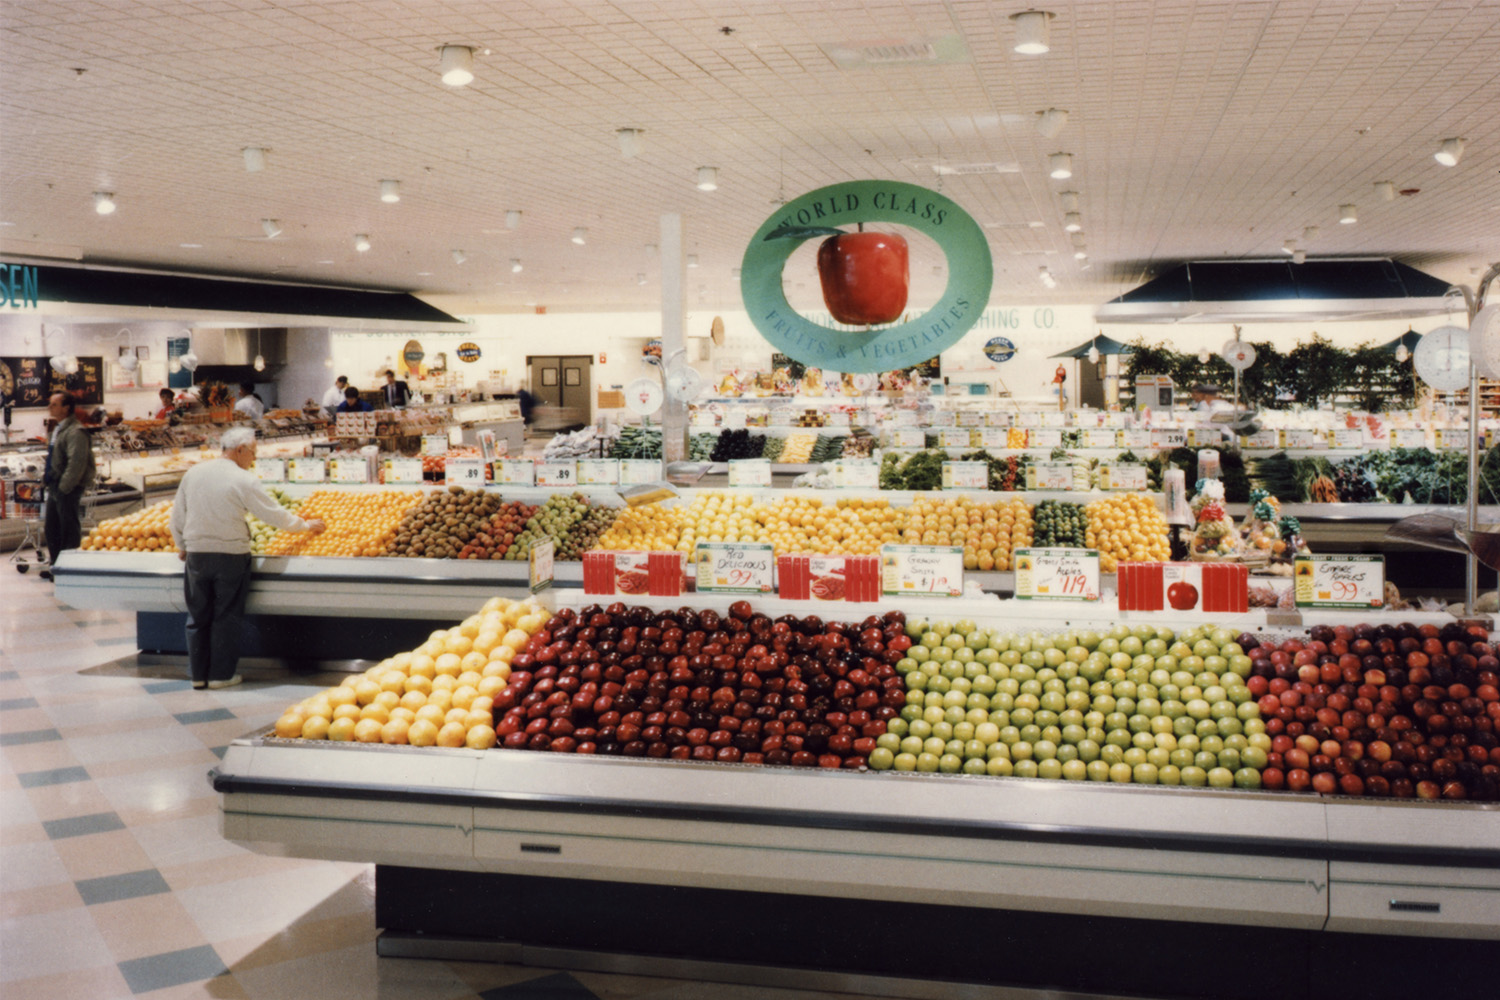 Produce section of grocery store, with assortment of apples to the front 